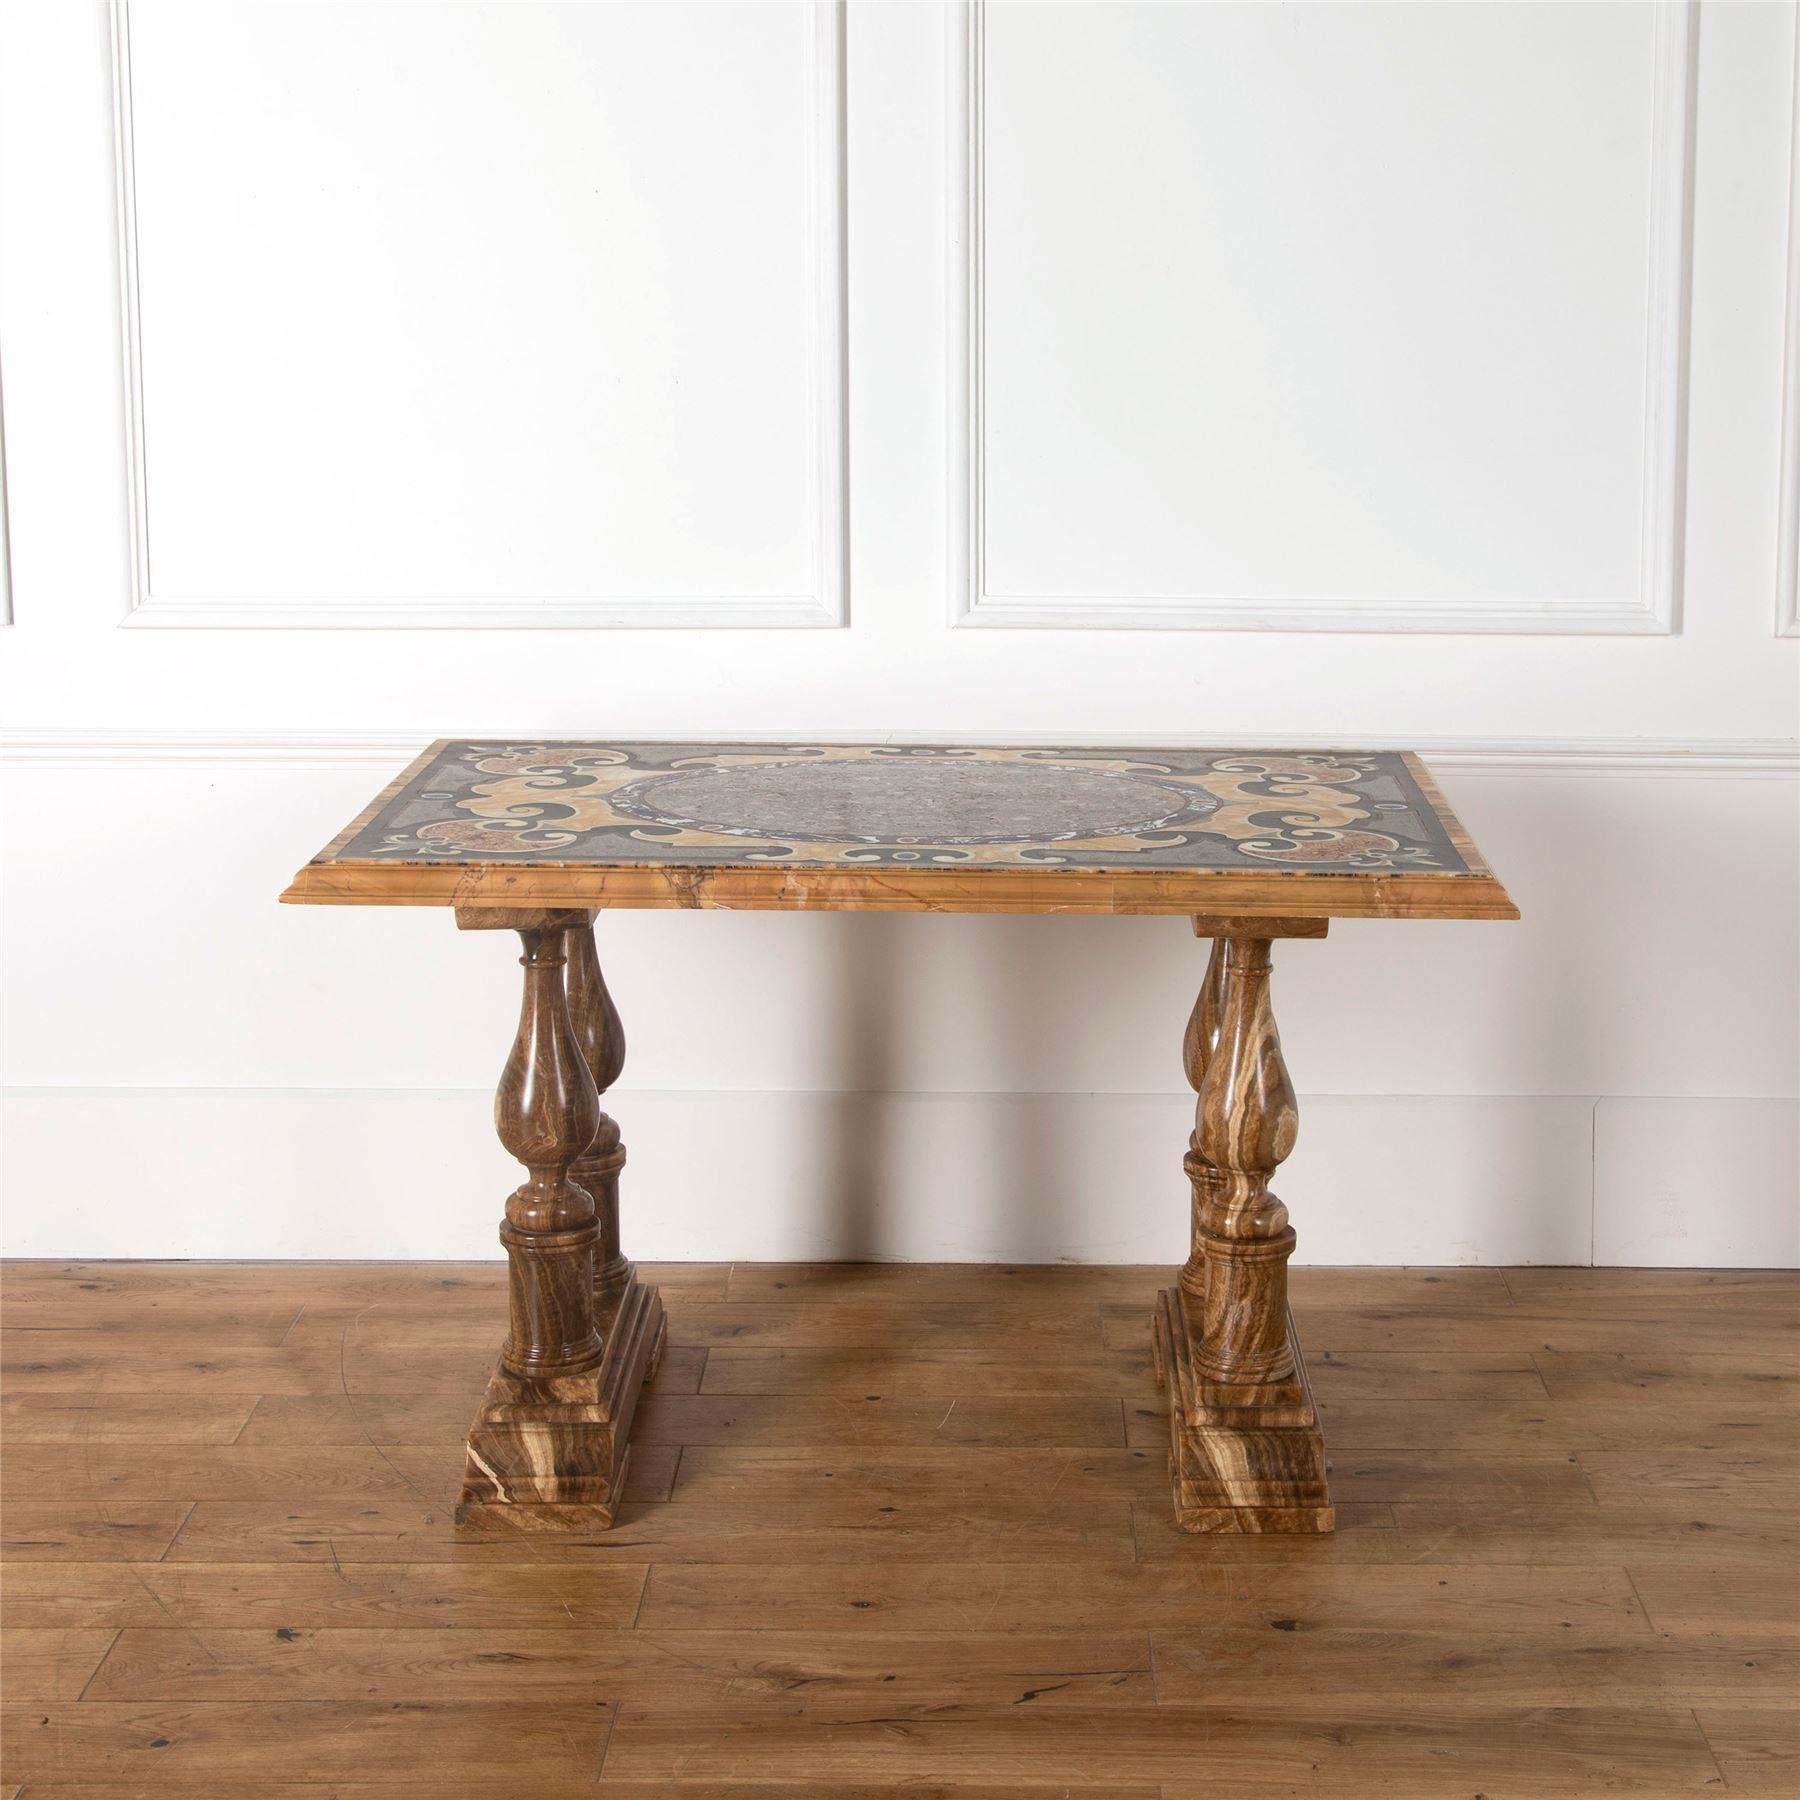 A fantastic 18th century Italian marble centre table. The beautifully inlaid top has a central oval plaque of extremely rare Luna Chiella marble (not being quarried for over a thousand years), with Rosso Antico edging and banded with Grande Antique,